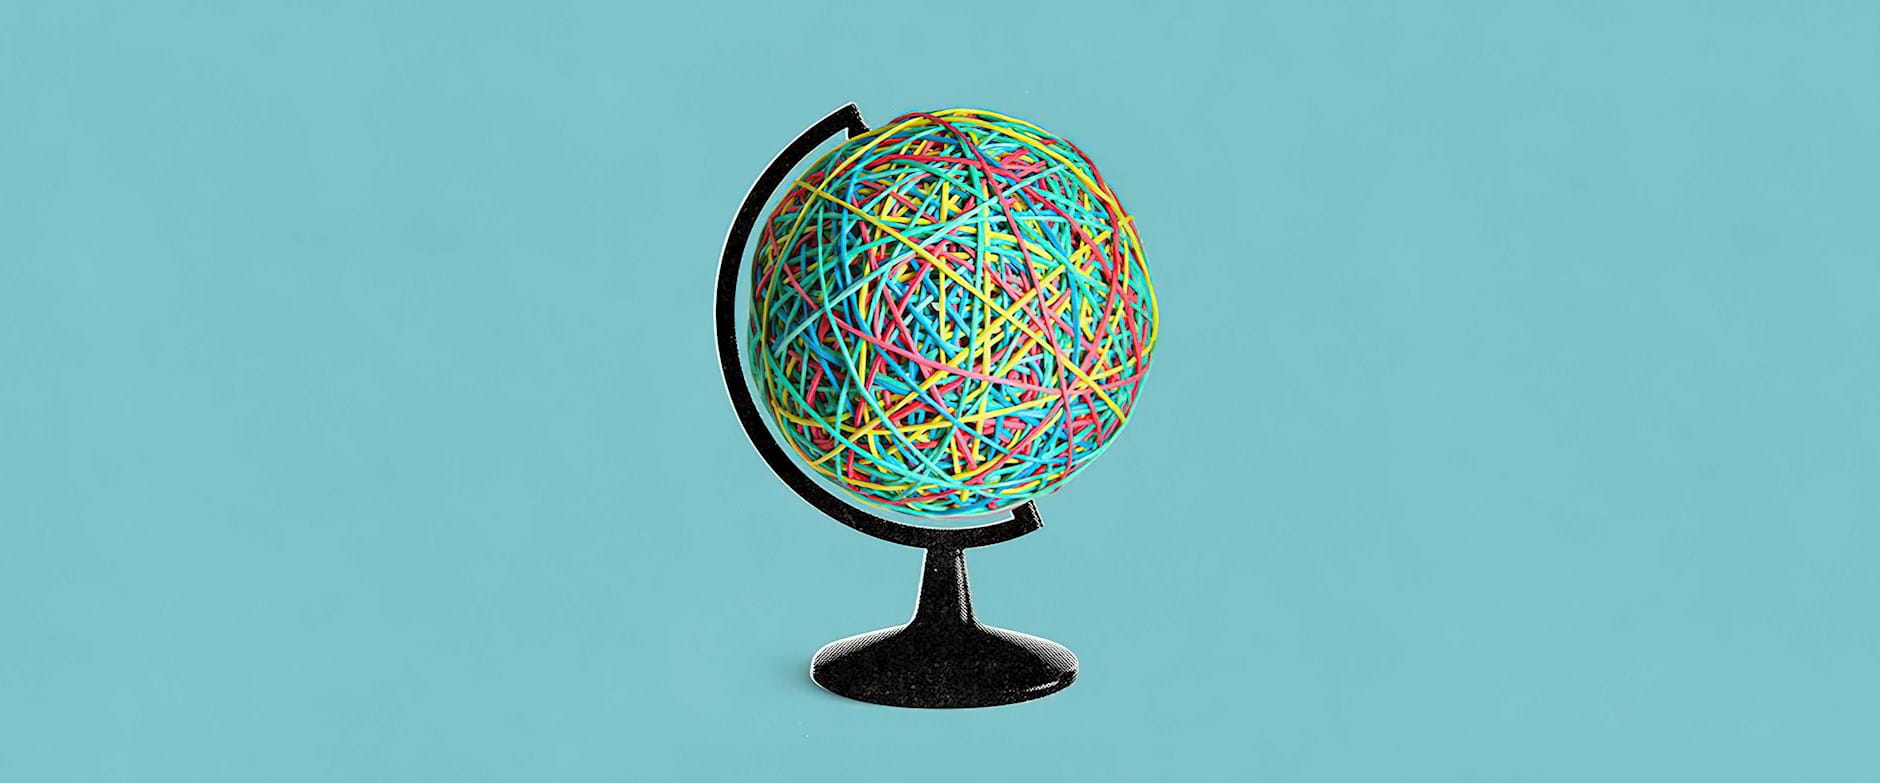 Globe made of rubber bands